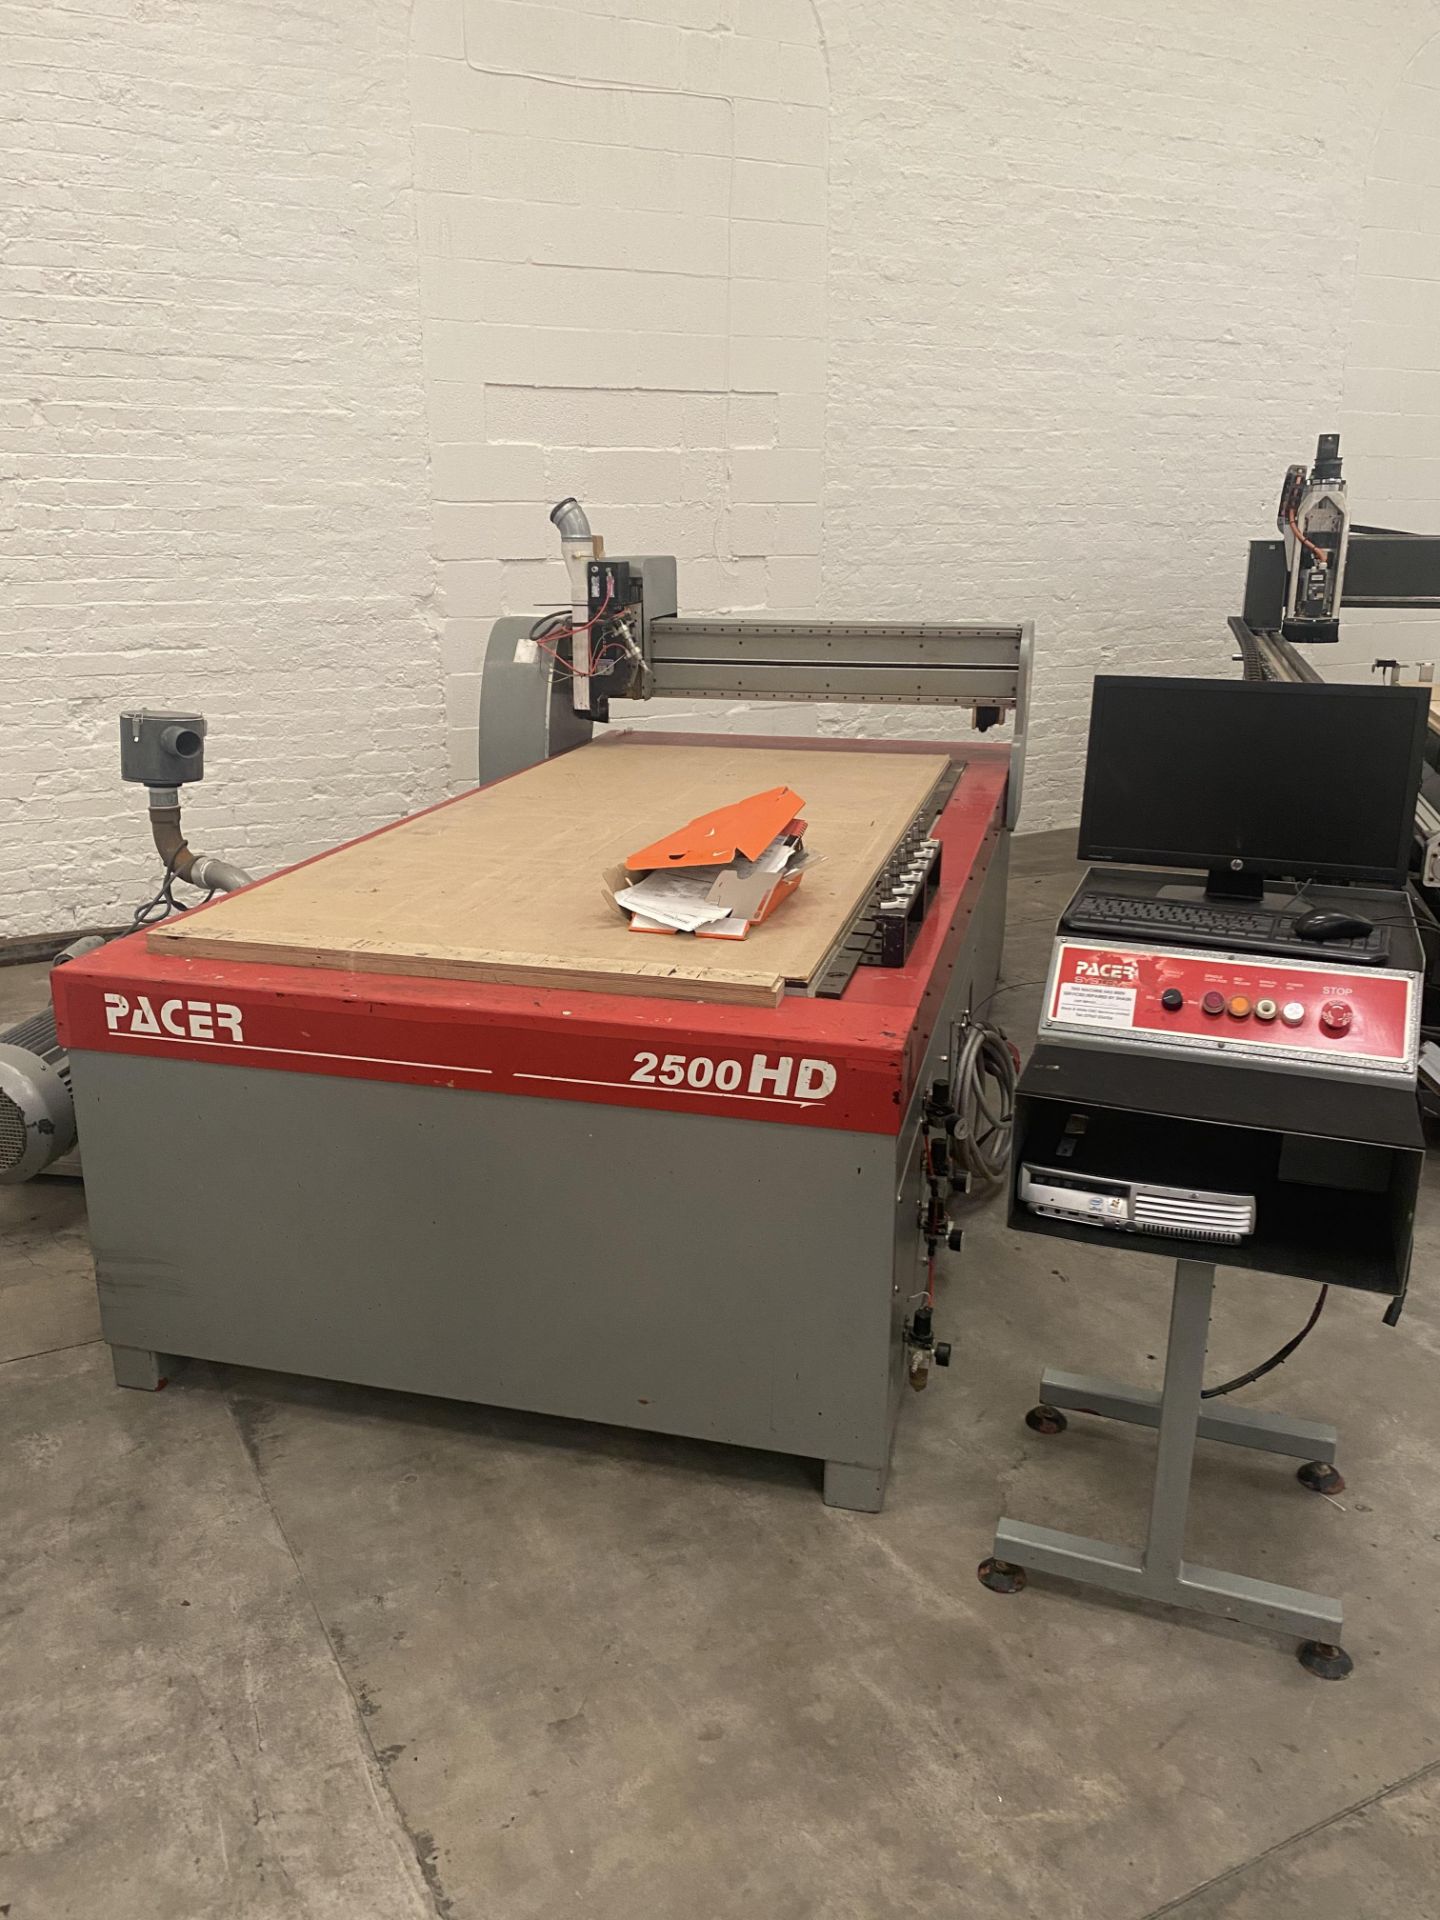 Pacer 2500 HD Pacer CNC Router, with auto tool changer, PC, software, Giordano Colombo ATC